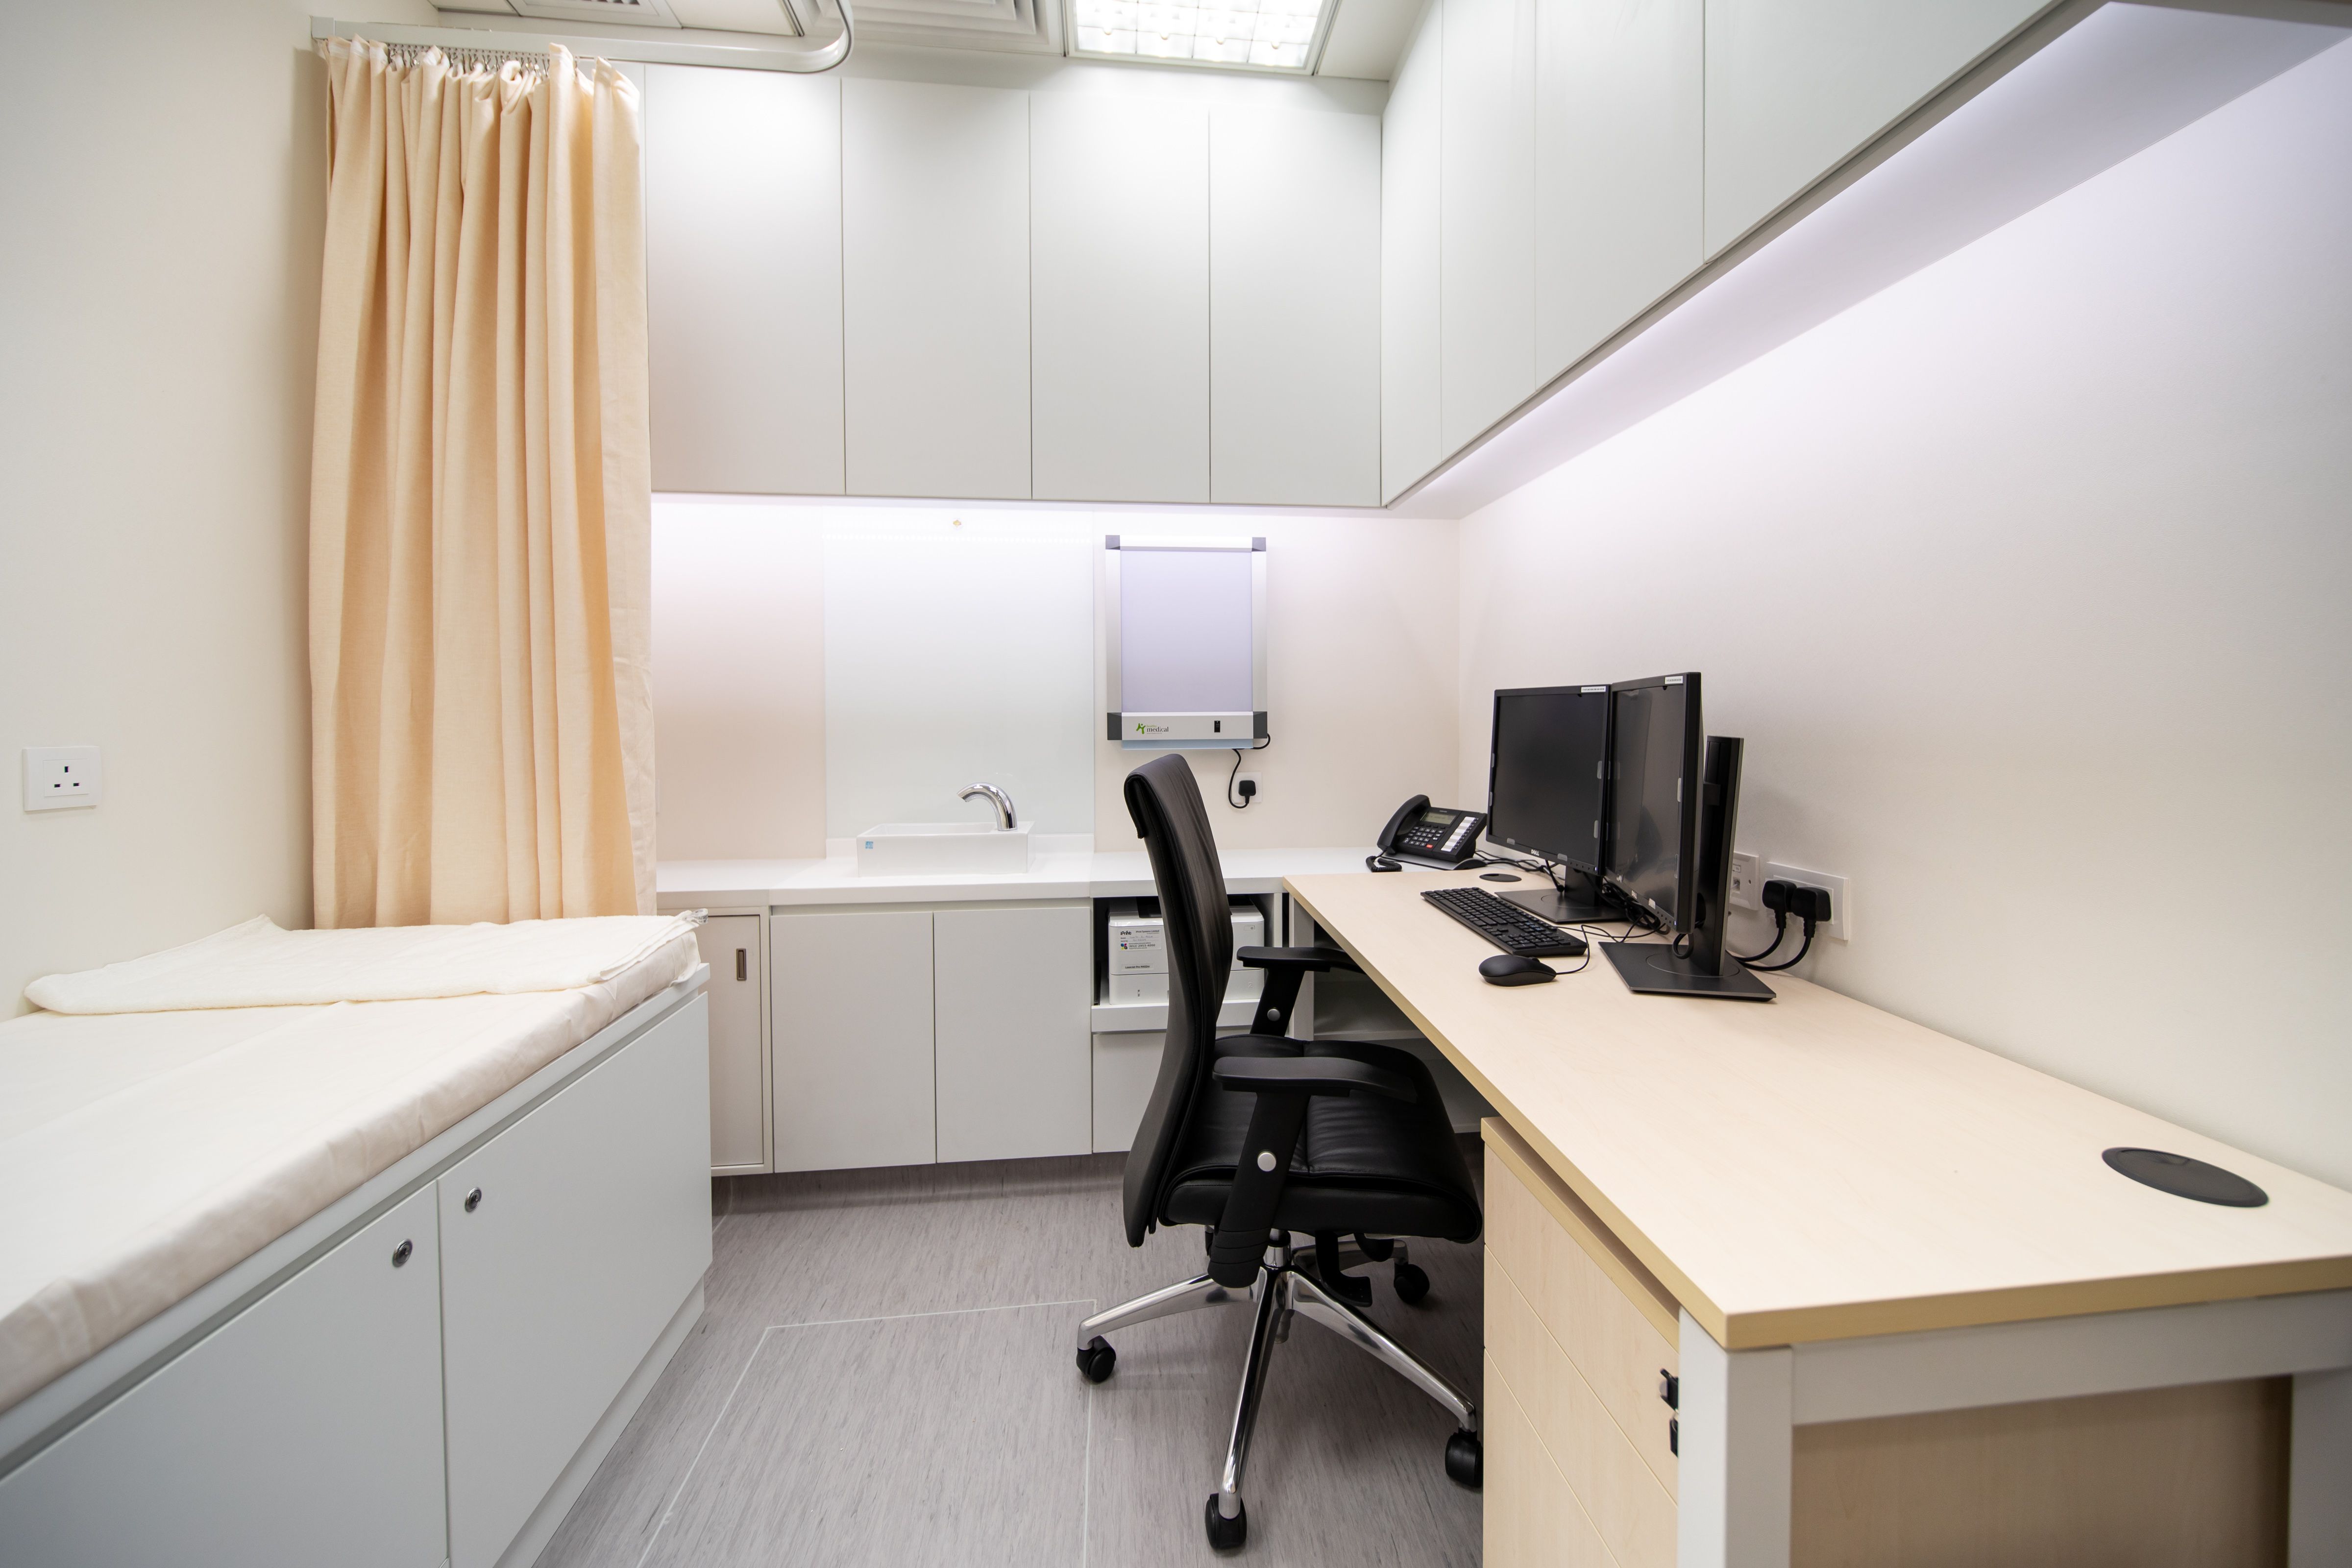 Examination room with patient bed, curtain, desk